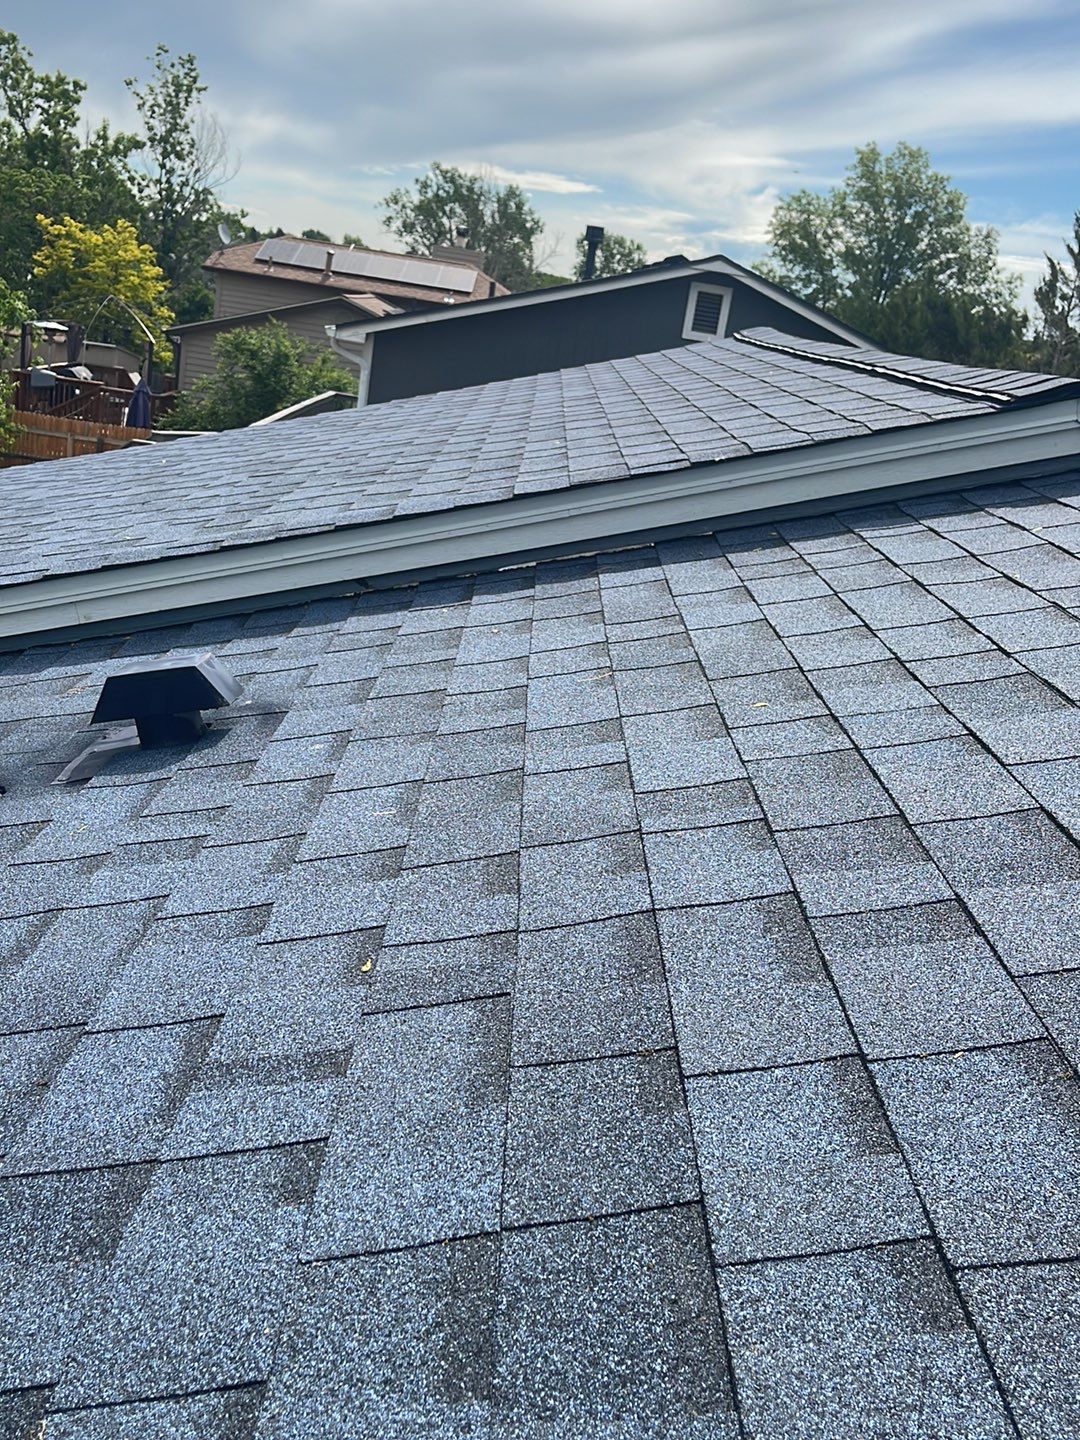 Denver roof inspection Best roofing company in Denver Roofing specialists Denver Denver roofing solutions